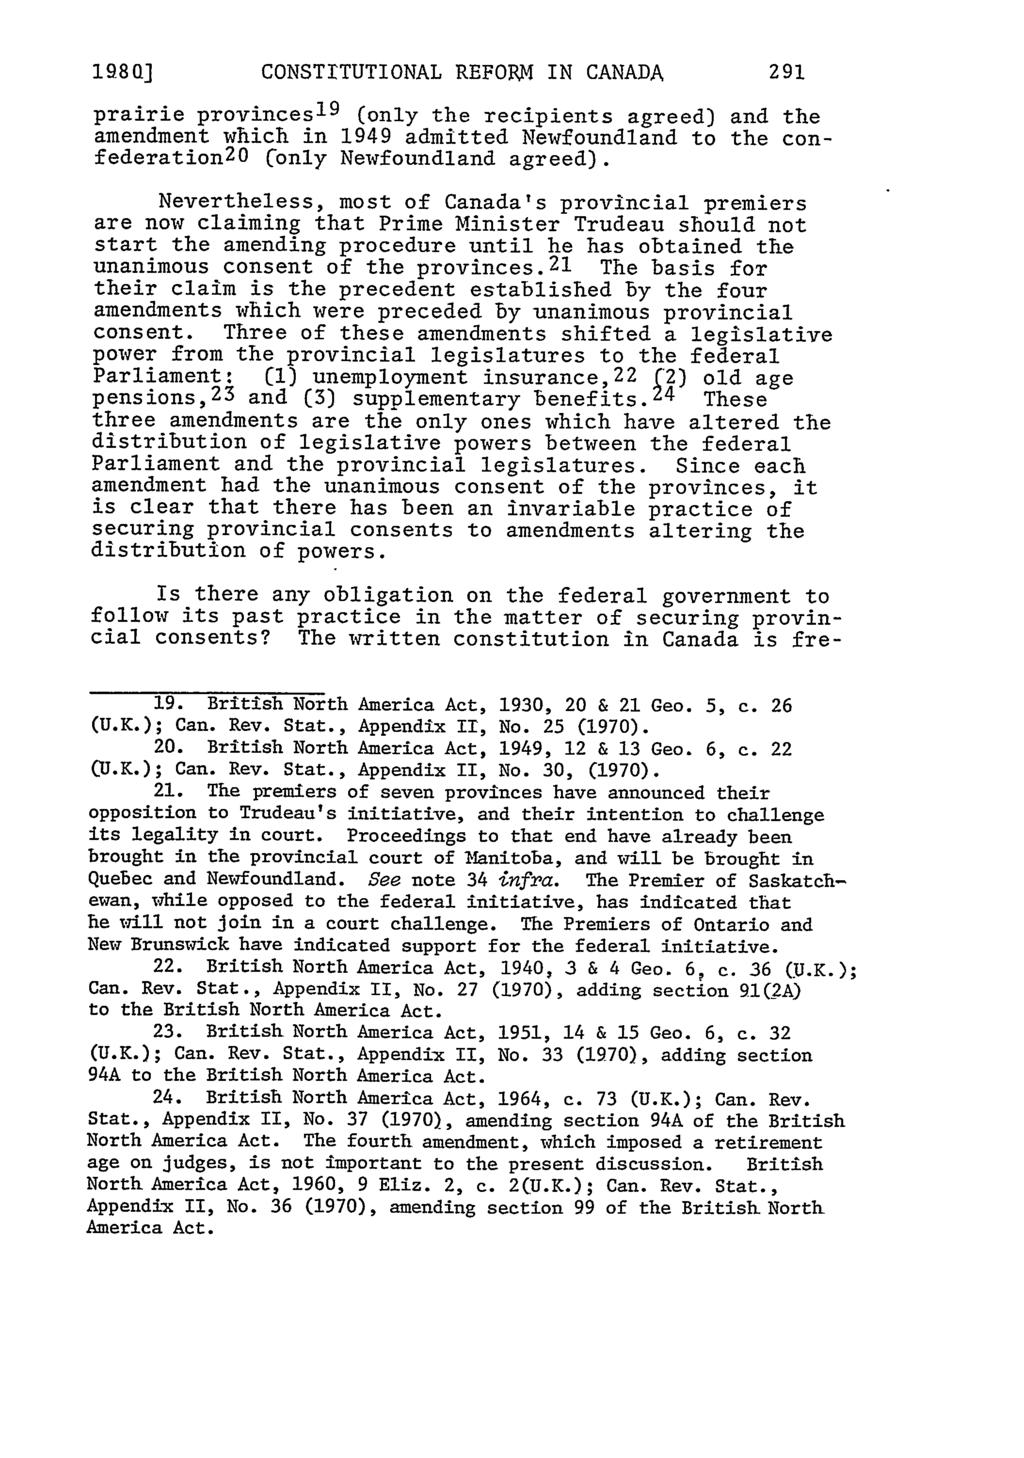 198G] CONSTITUTIONAL REFORM IN CANADA prairie provinces 1 9 (only the recipients agreed) and the amendment which in 1949 admitted Newfoundland to the confederation 2 o Conly Newfoundland agreed).